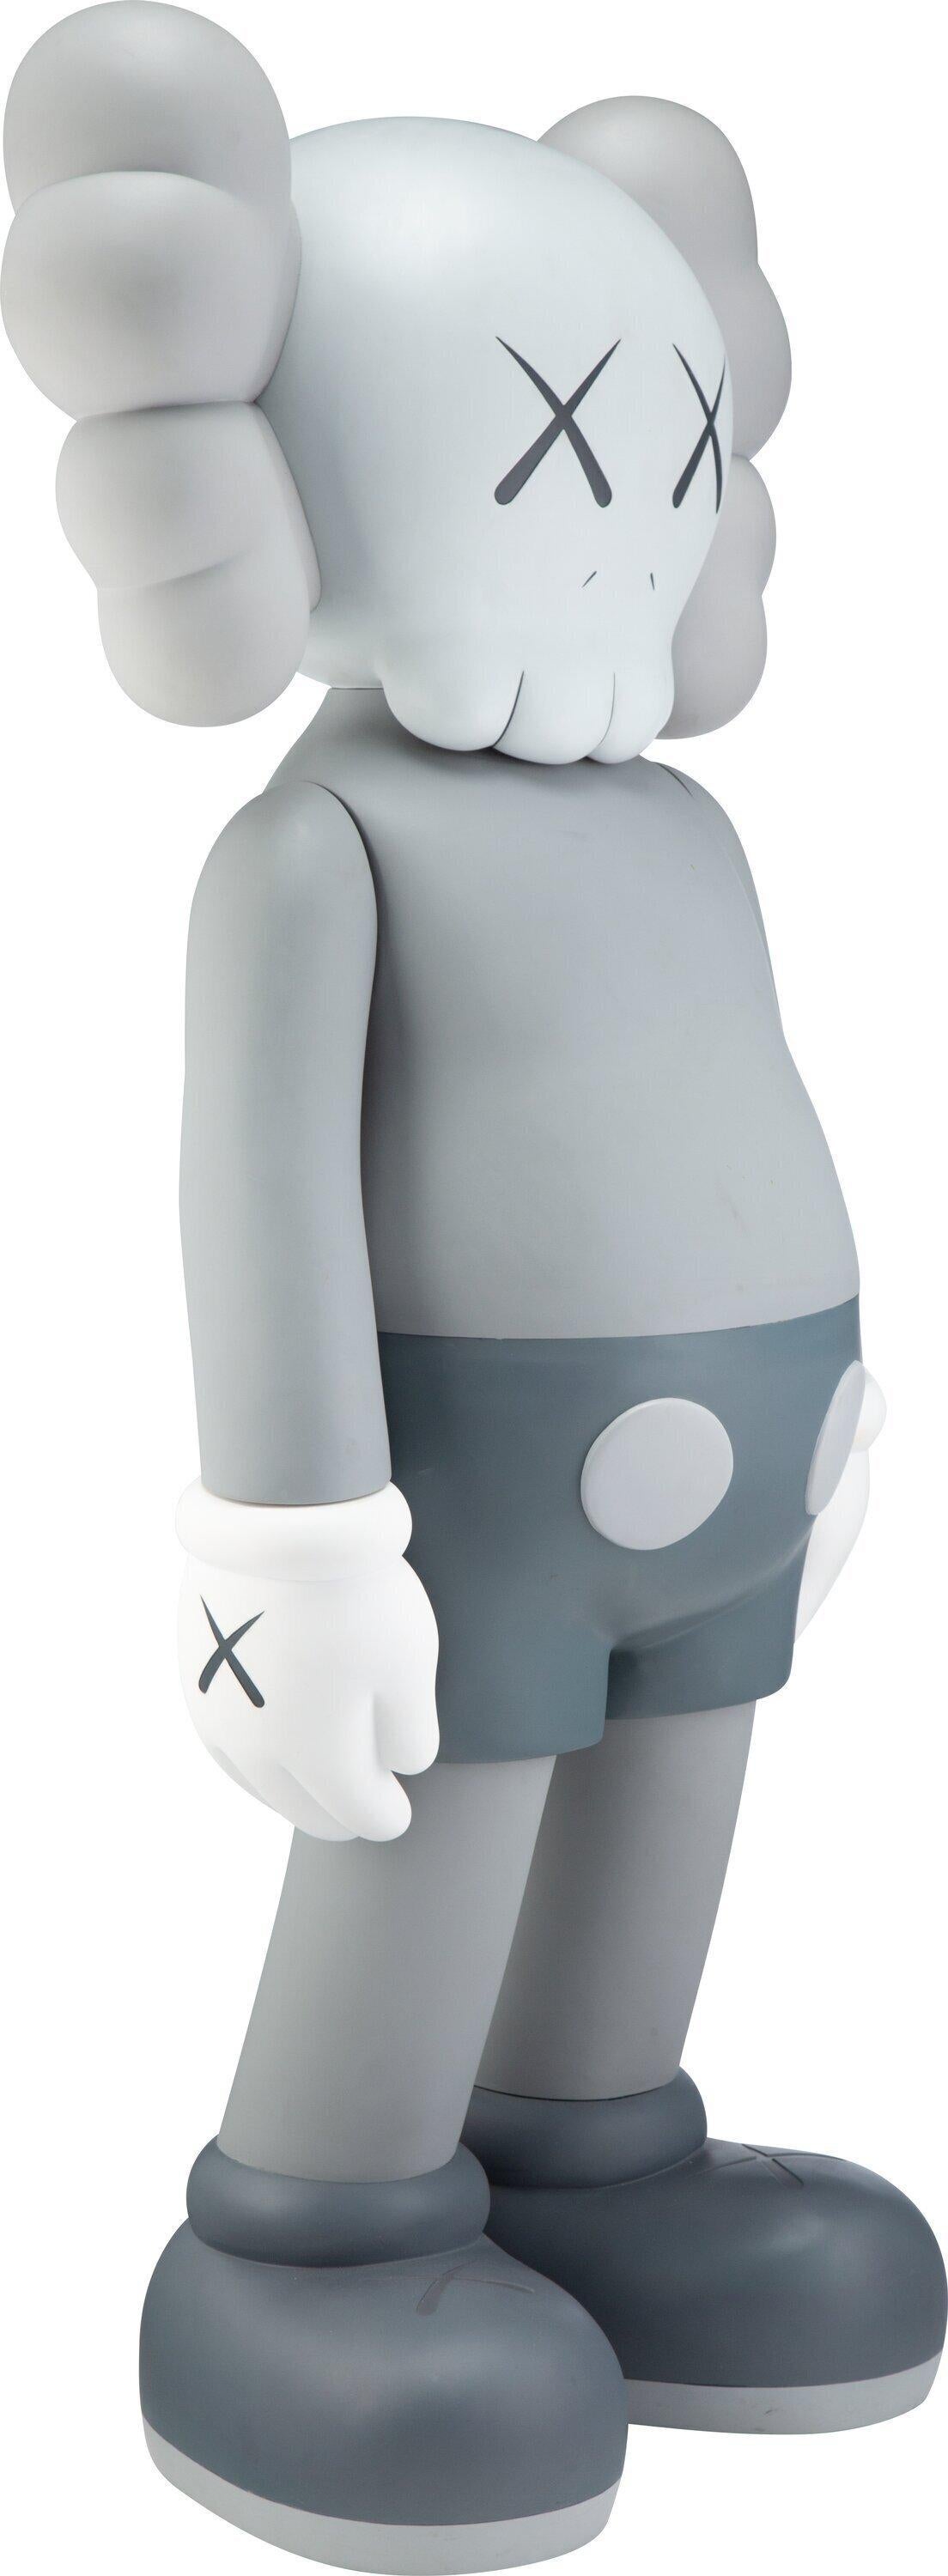 4FT Companion (Grey) - Contemporary Sculpture by KAWS